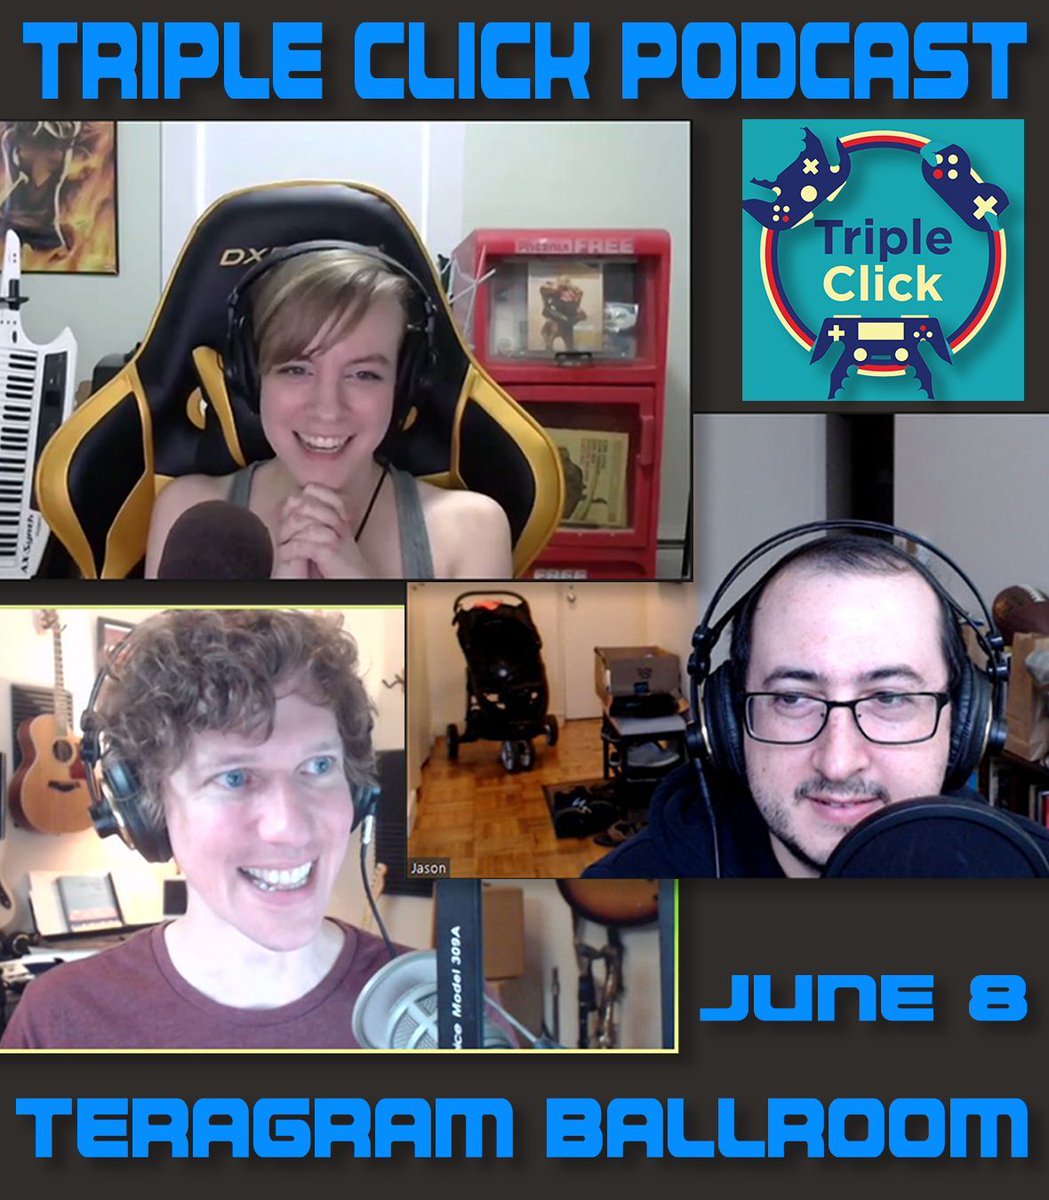 Join us for the Triple Click Podcast on June 8th at Teragram Ballroom! 🎙️ Get your tickets now - link in bio! 🌟 #TripleClickPodcast #TeragramBallroom